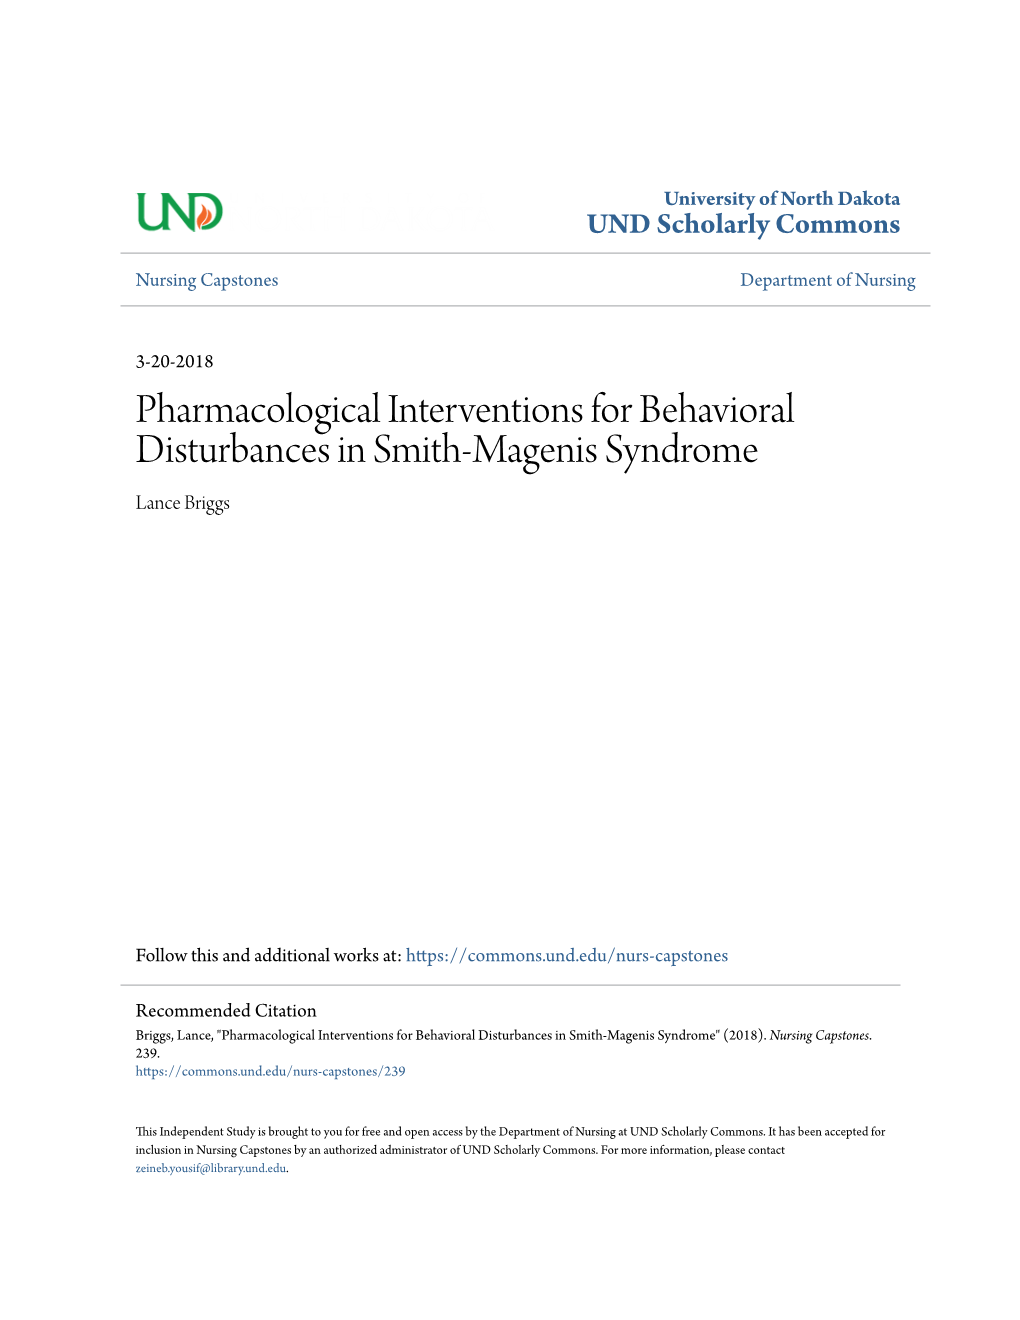 Pharmacological Interventions for Behavioral Disturbances in Smith-Magenis Syndrome Lance Briggs